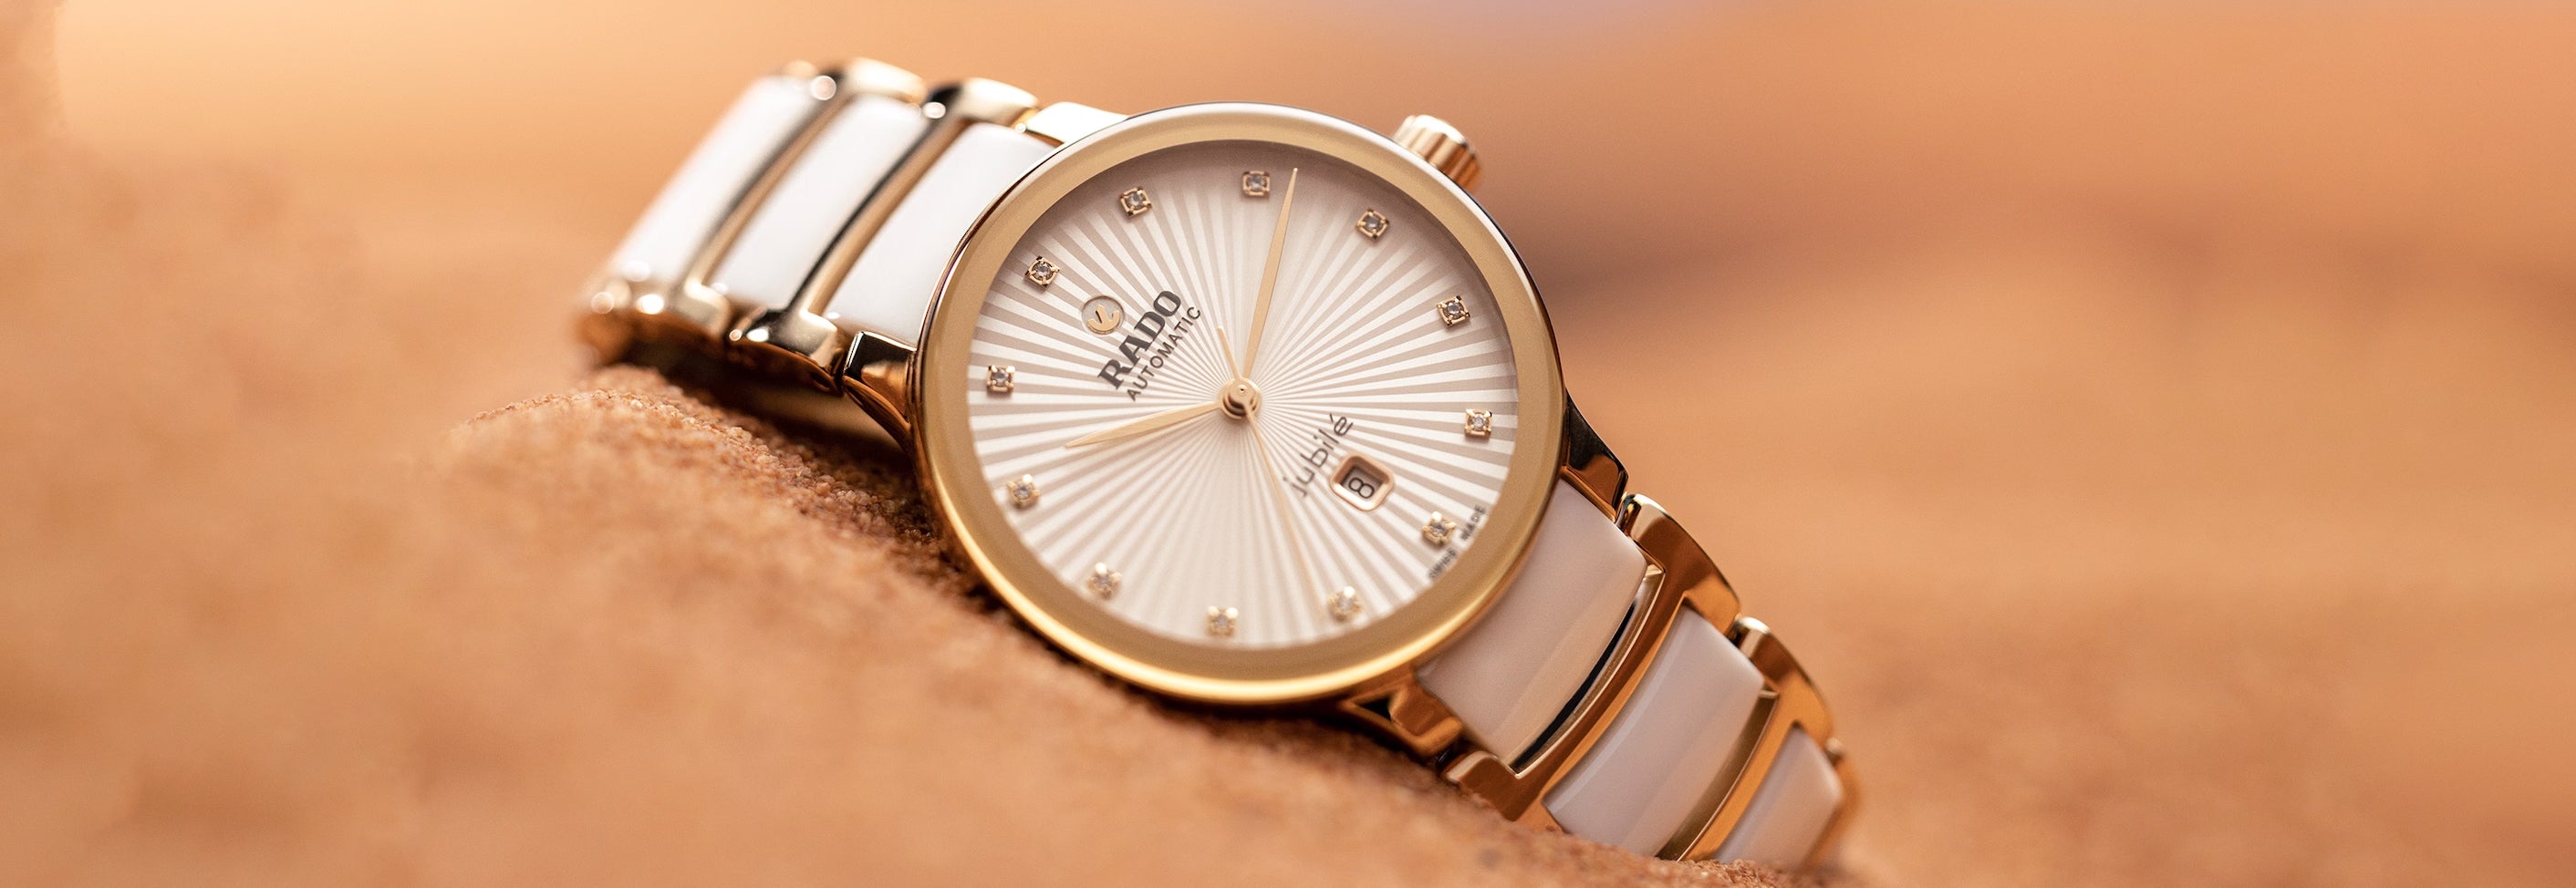 rado product page banner